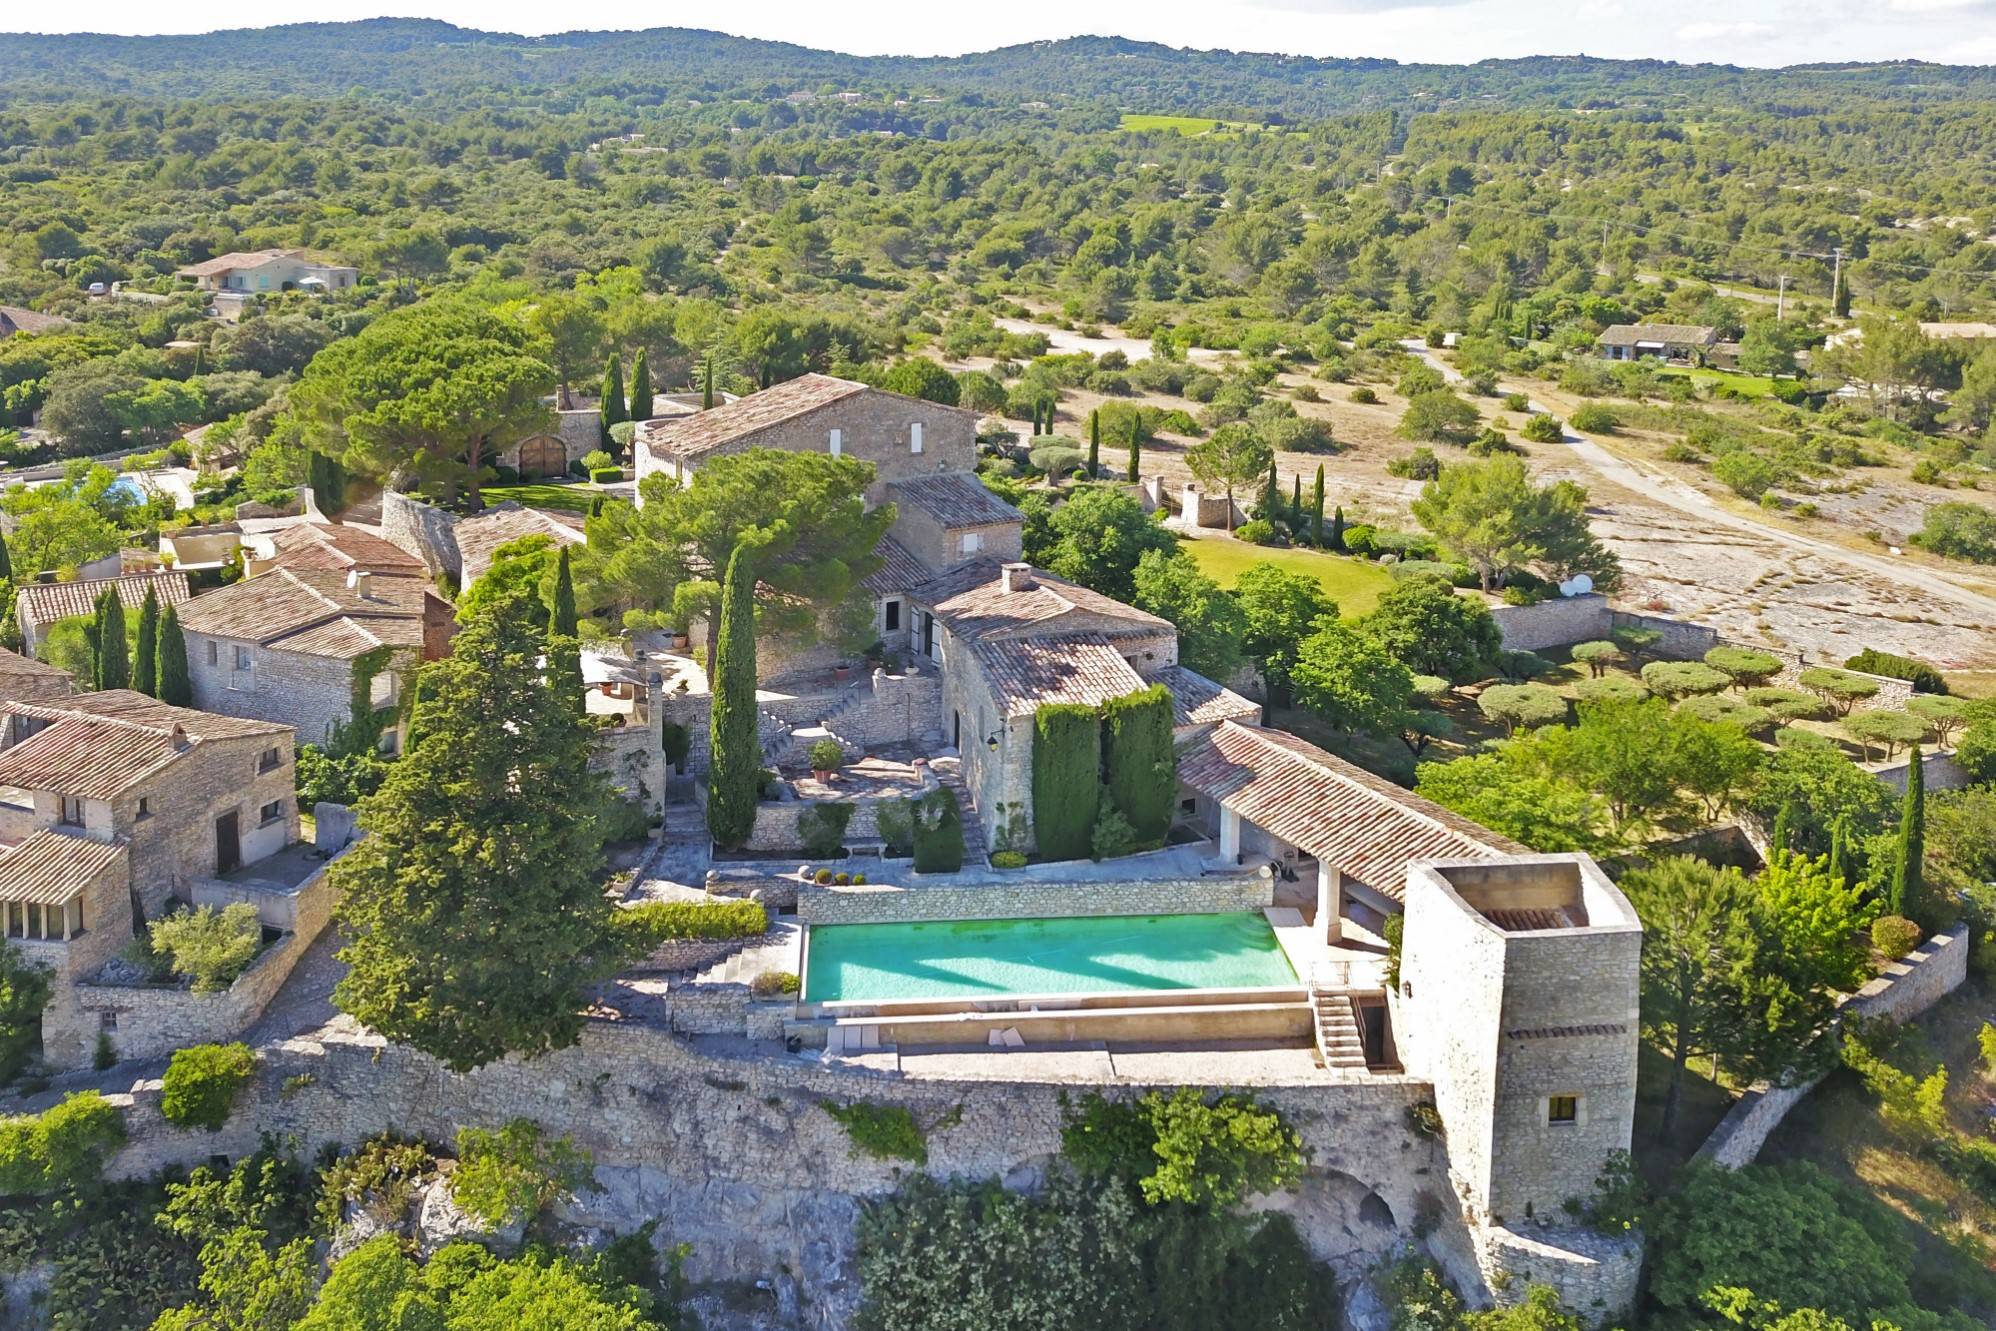 In Luberon, 12th-century Commandery of the Knights Templar entirely renovated